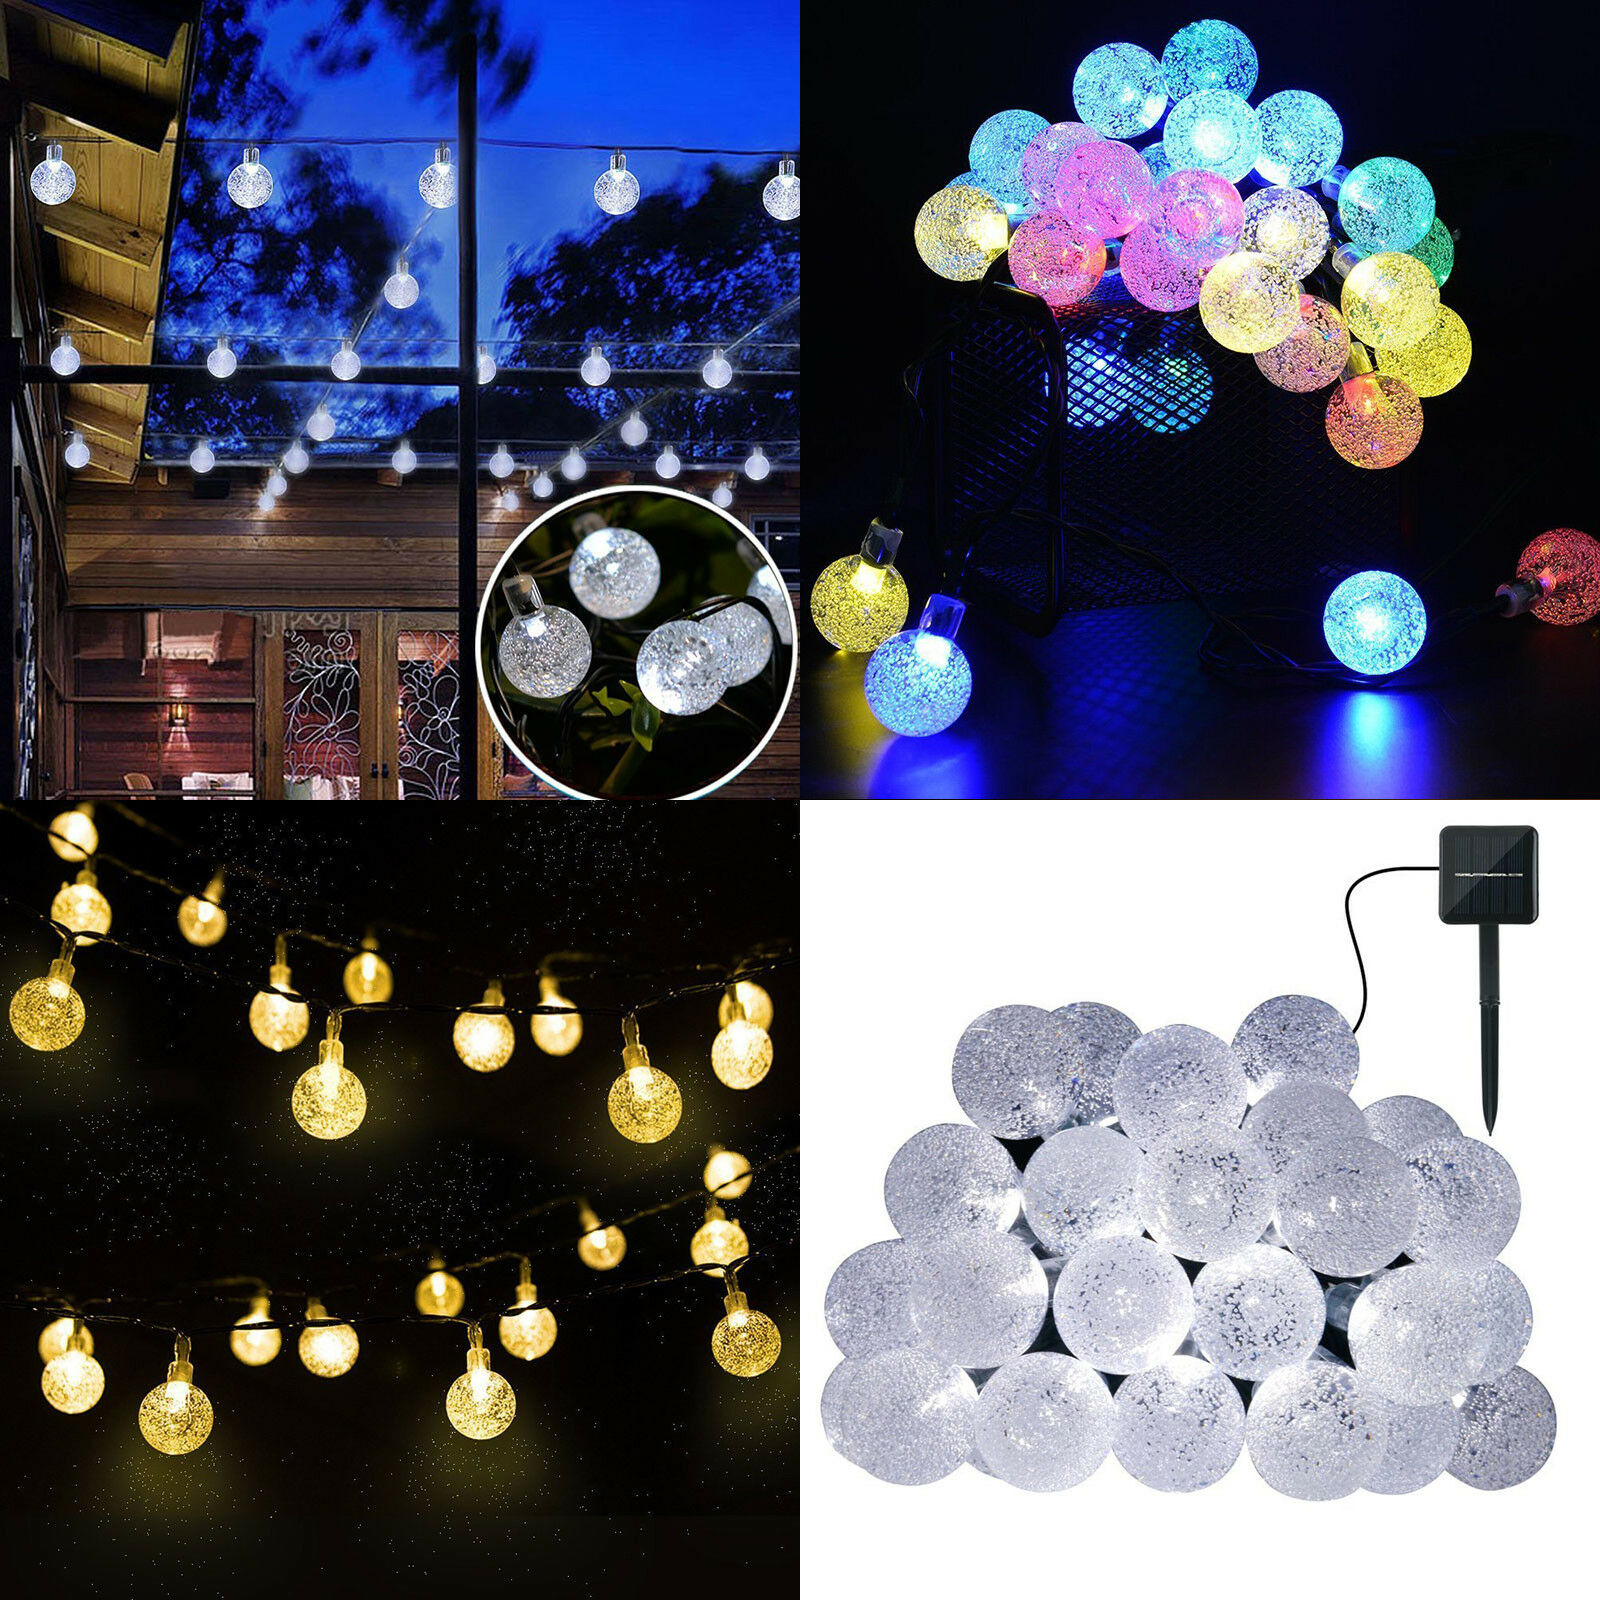 21ft-Solar-Powered-String-Lights-30-Crystal-Balls-Outdoor-Home-LED-Fairy-Lights-Decorations-1605227-2